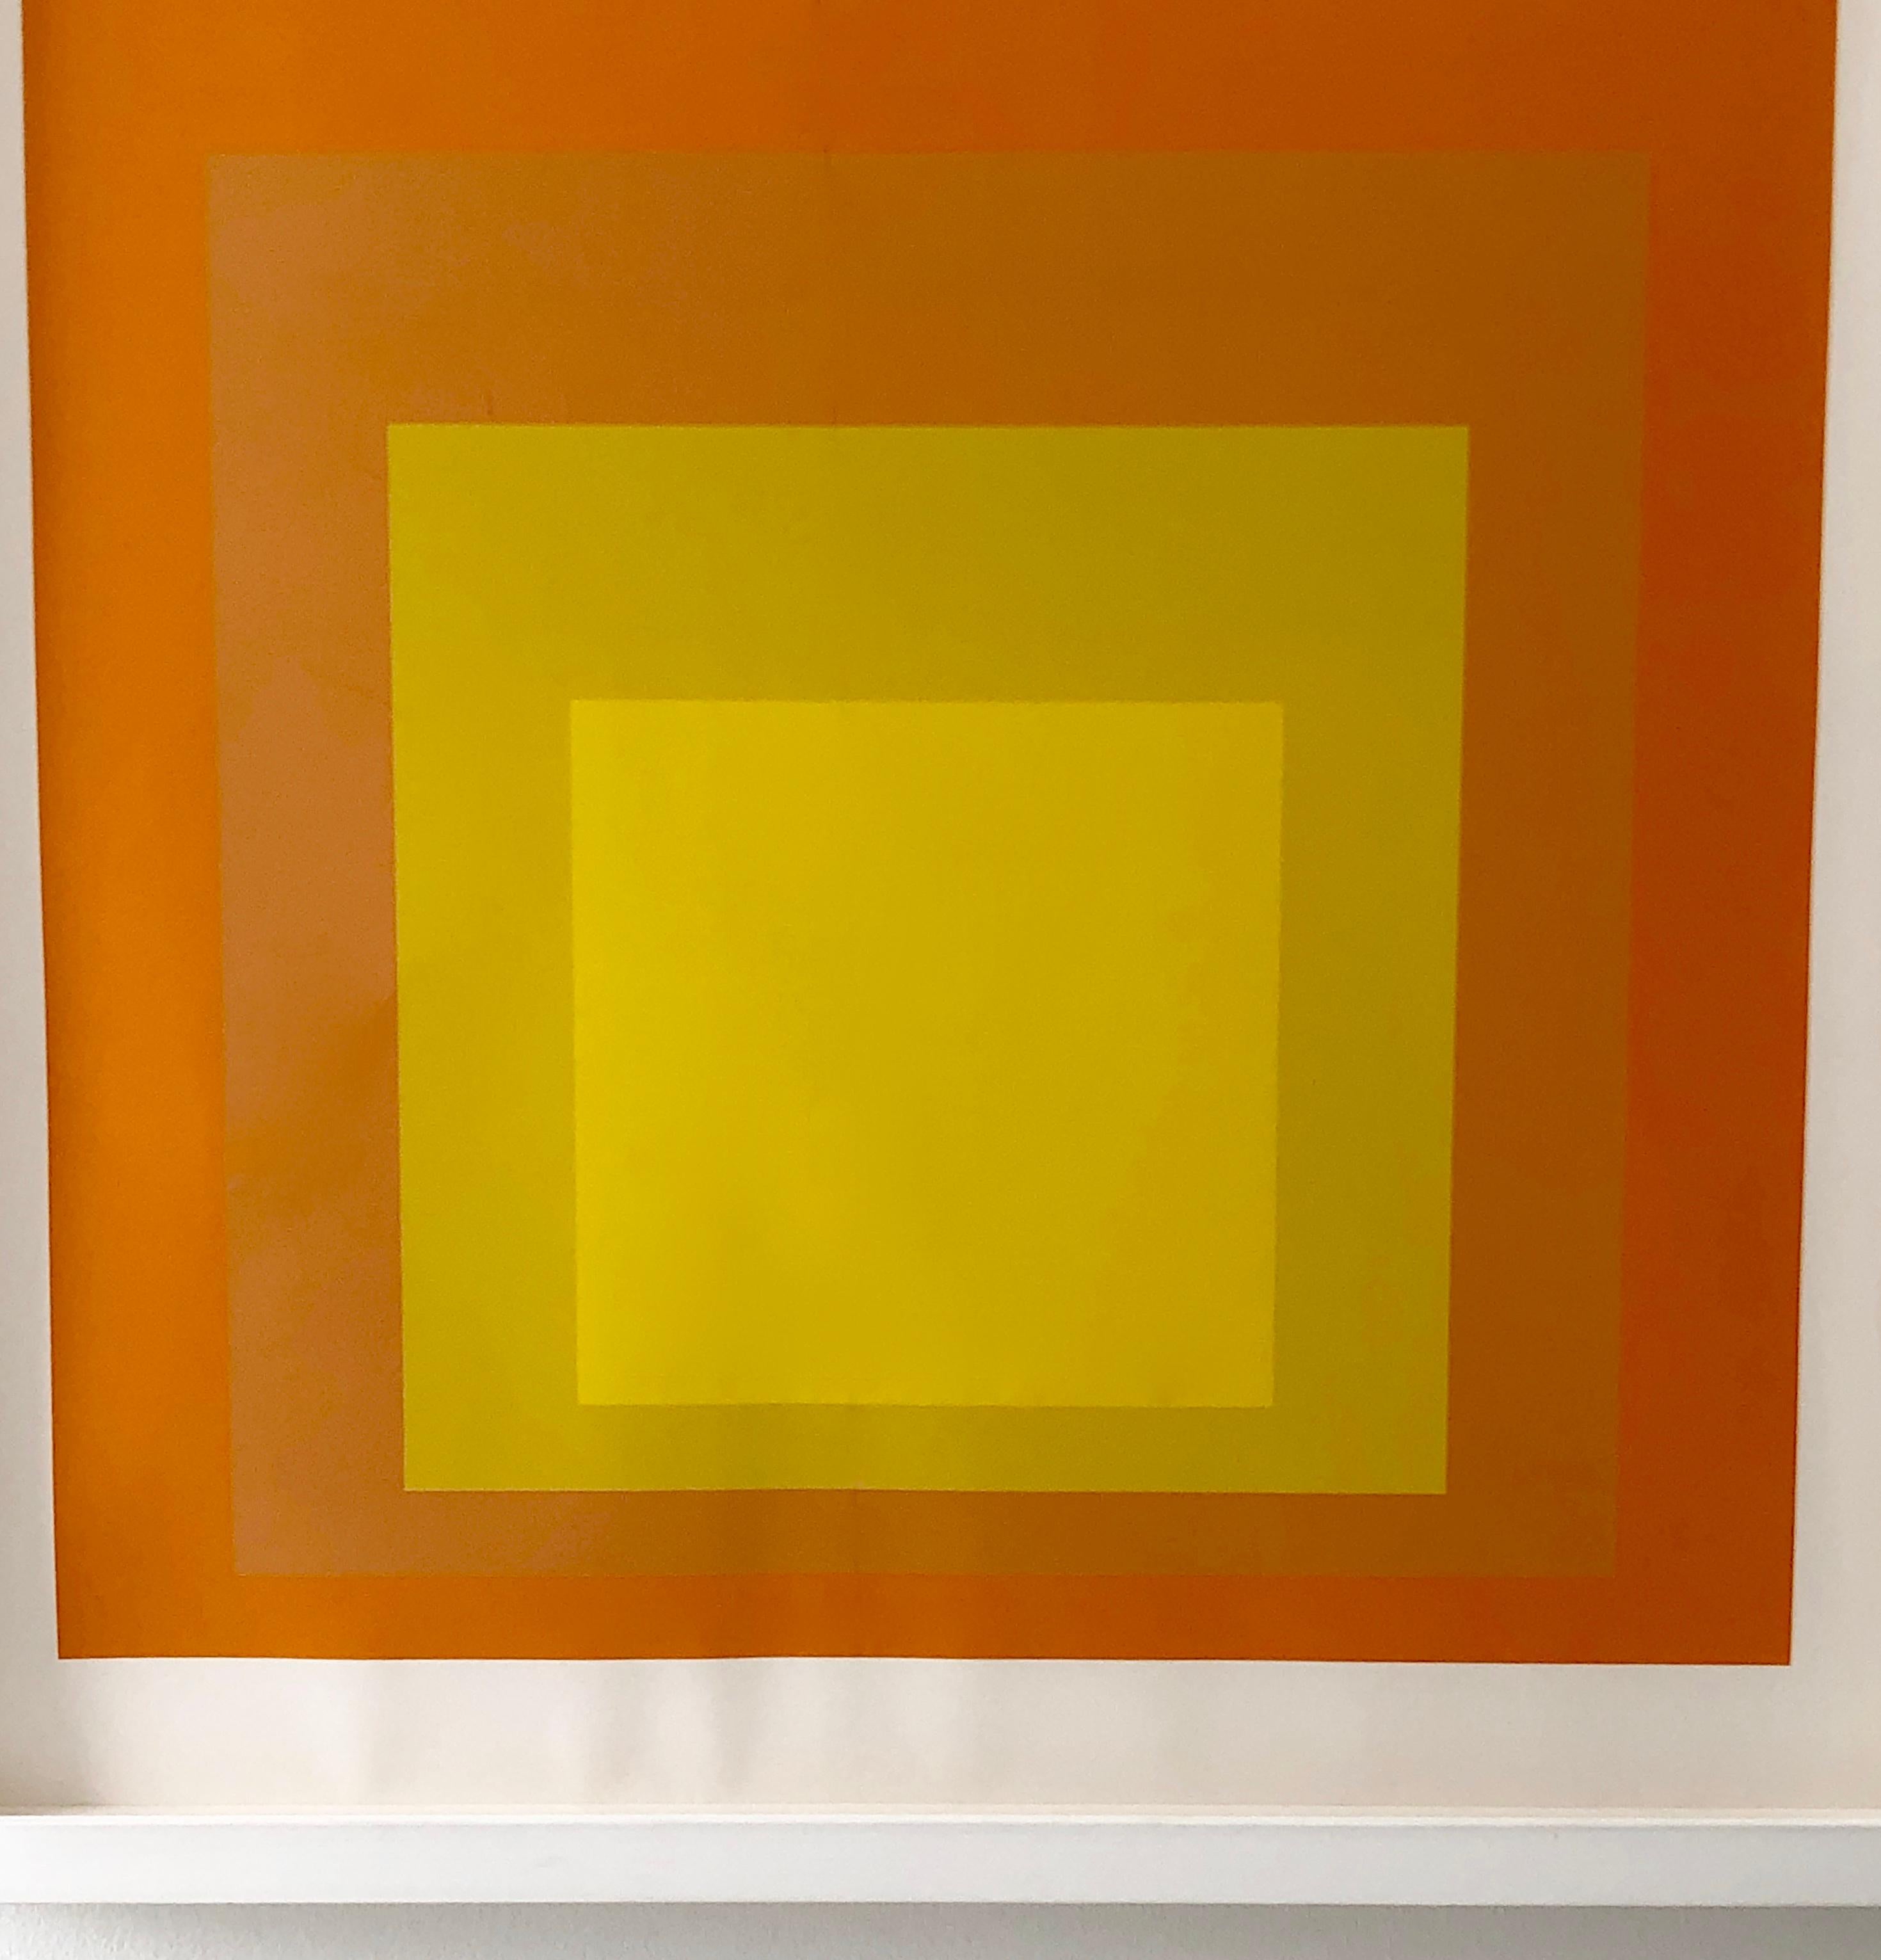 Offered is a framed in white Mid-Century Modern abstract silkscreen by Josef Albers (1888-1976) entitled 